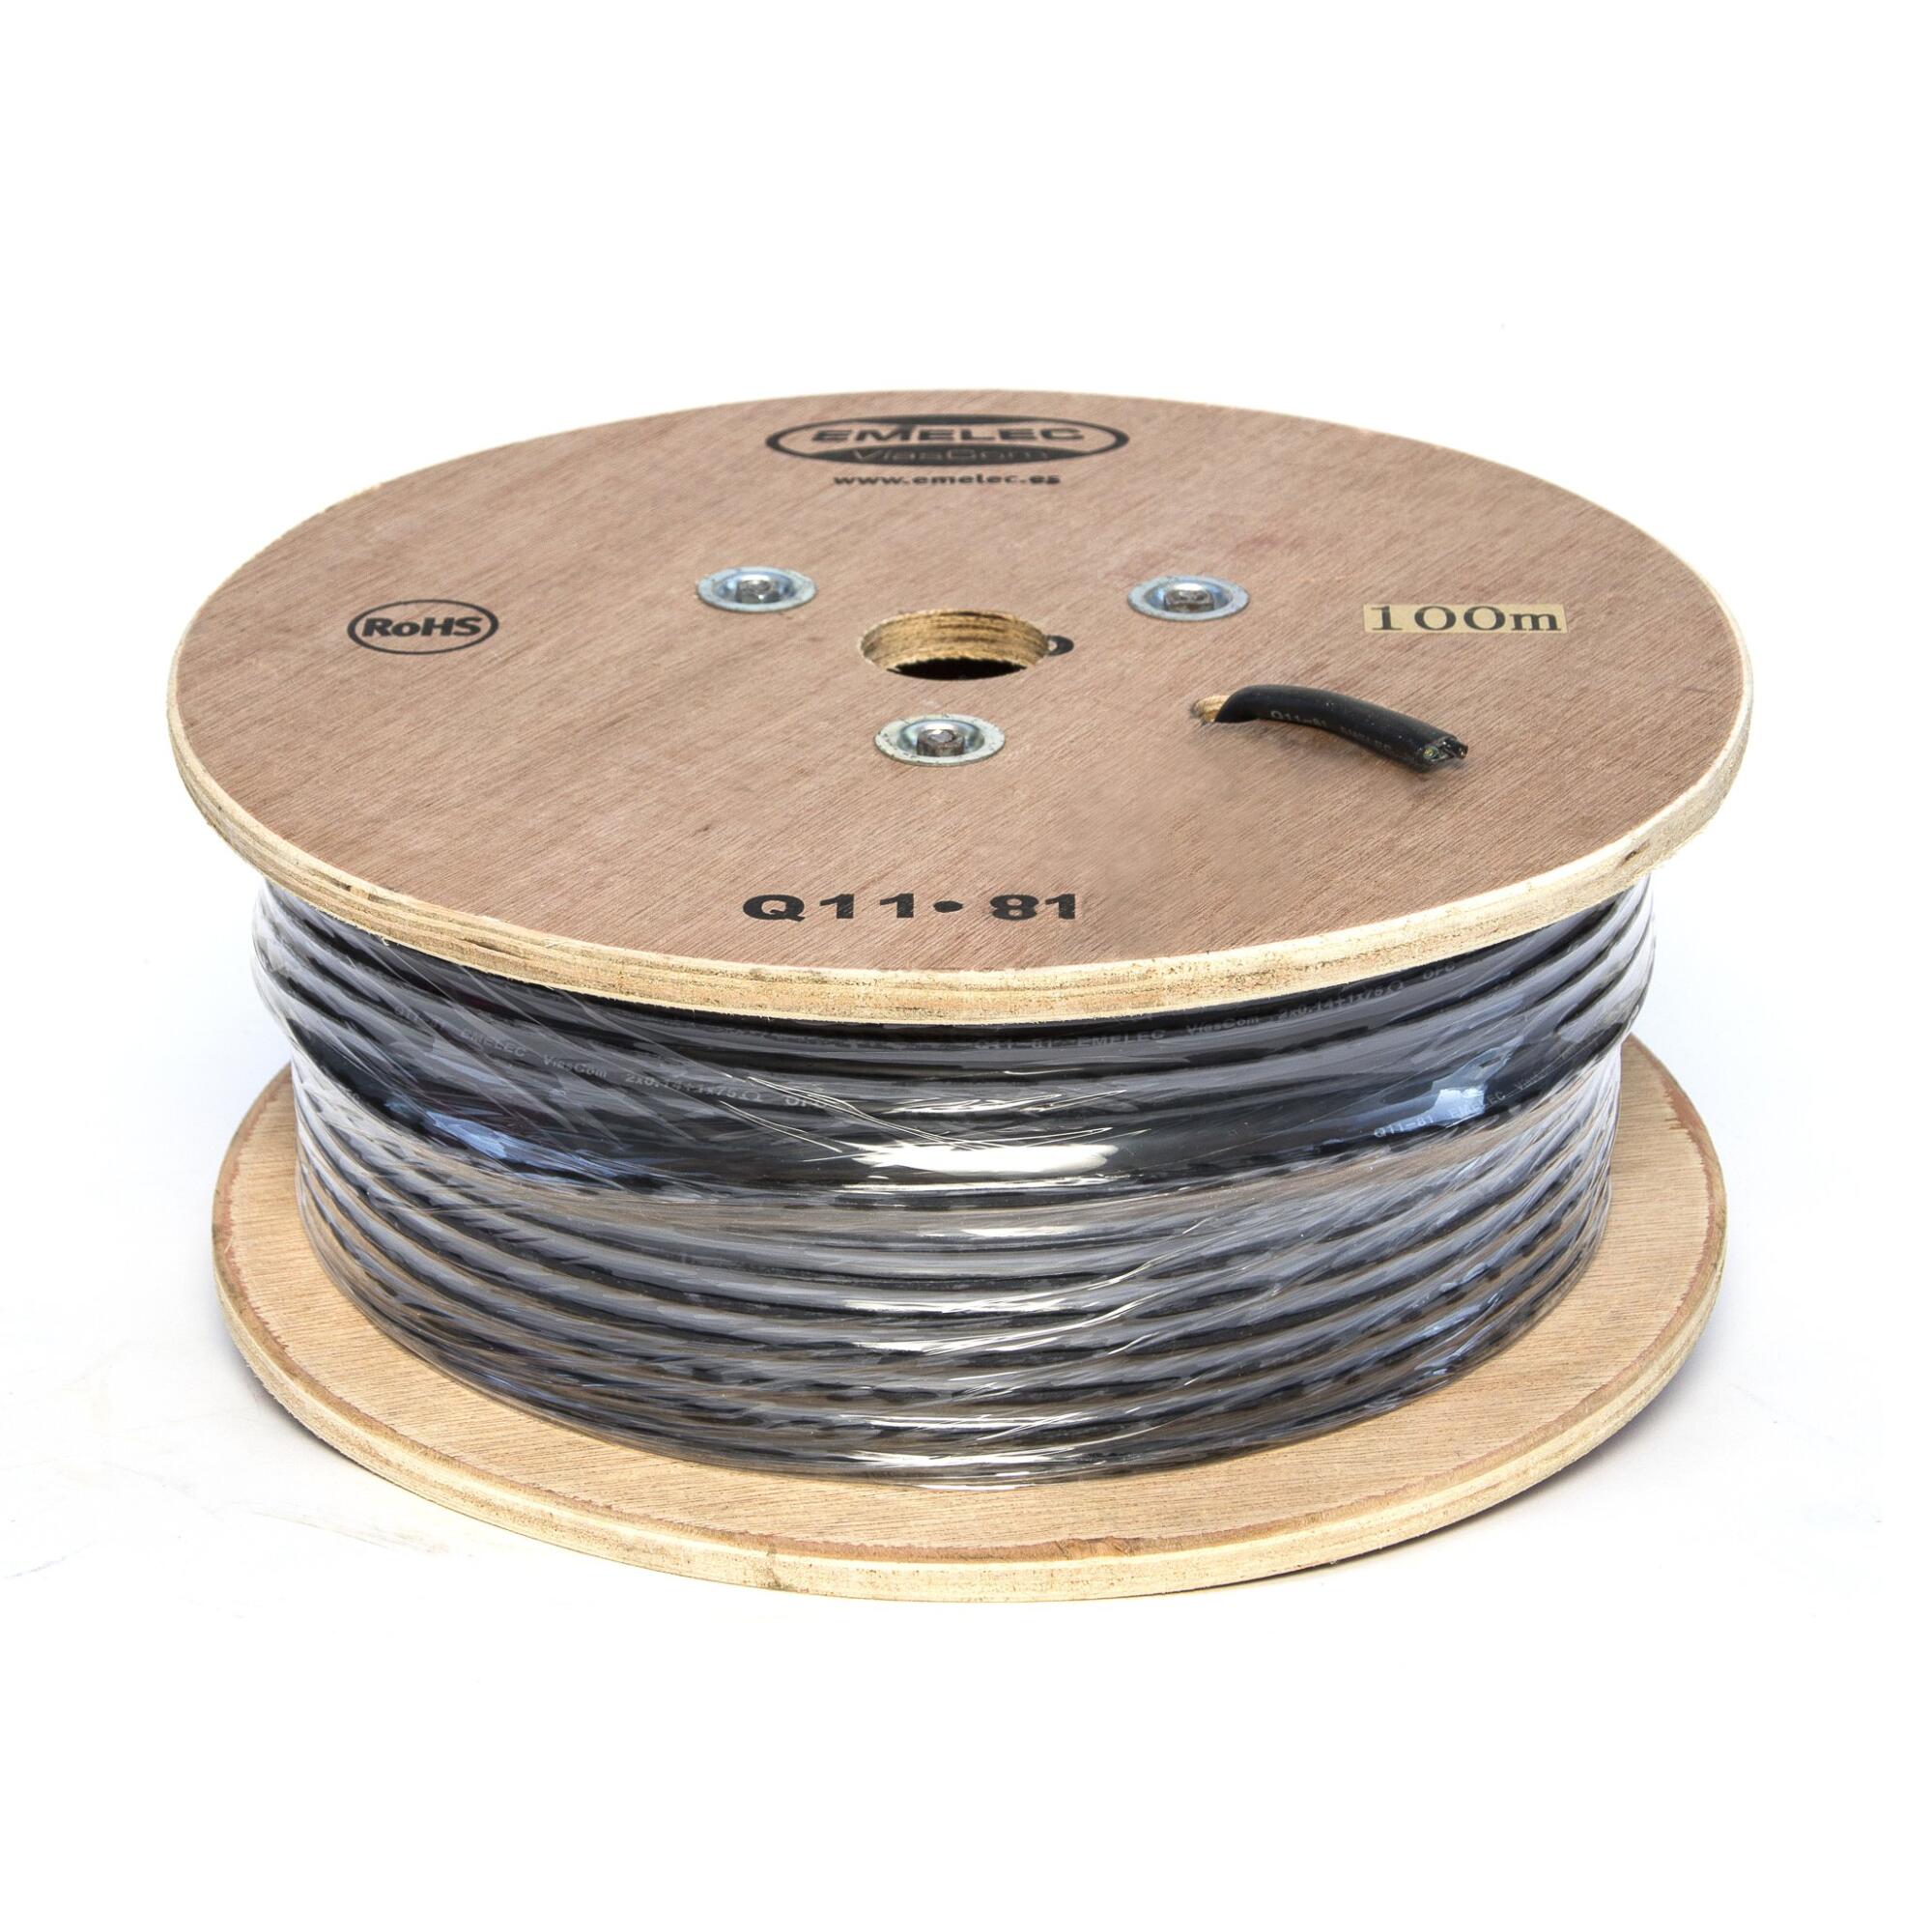 Cable reel Q11-81